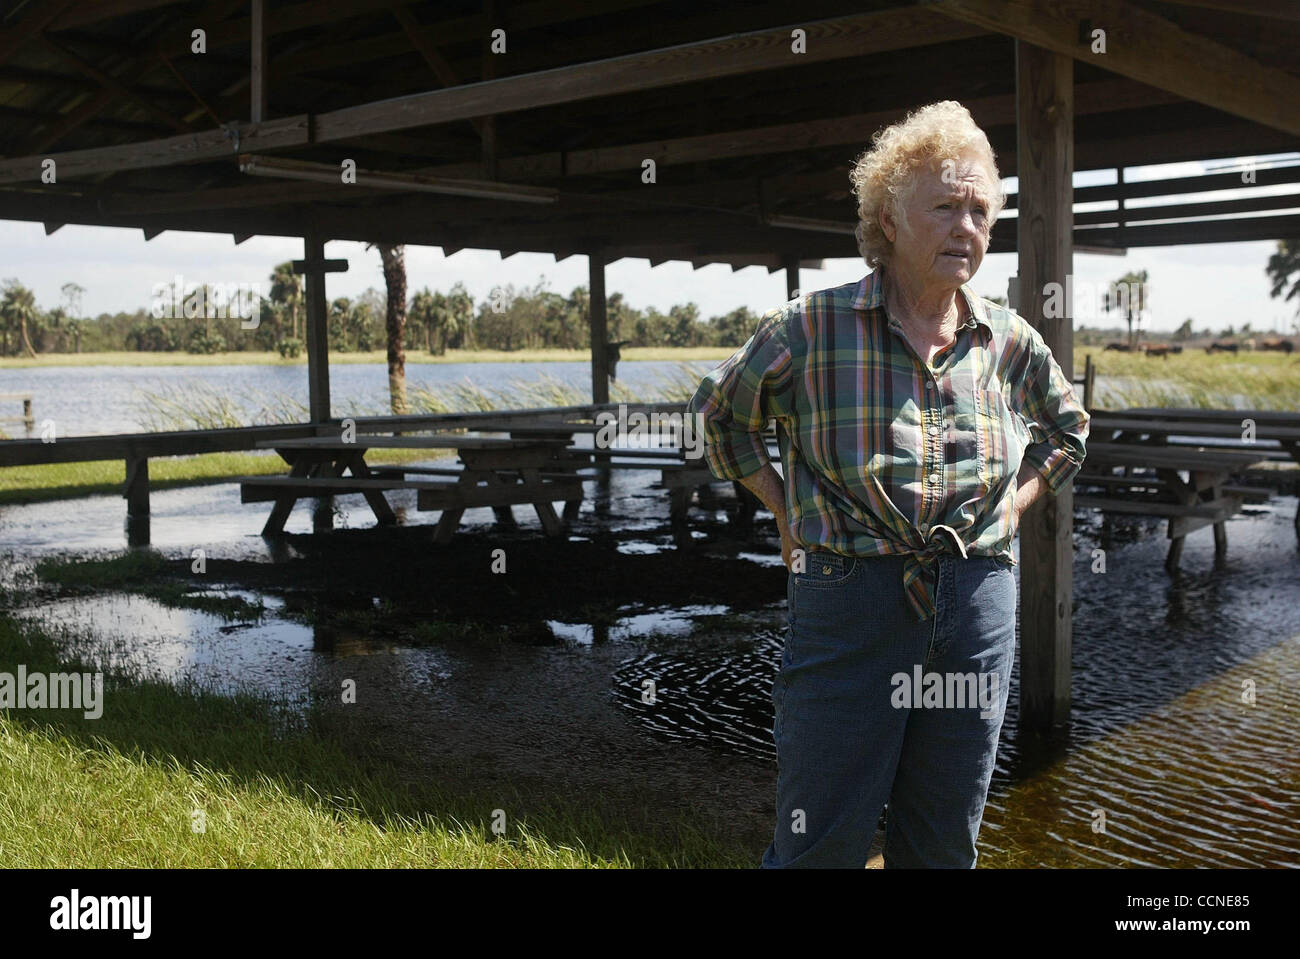 092704 tj hur jeanne e -- Staff photo by Taylor Jones/09-27-04. INDIANTOWN, FL. FOR RACHEL HARRIS' STORY. Iris Wall(cq), 75, stands under a pavilion on her flooded 1,200 acre ranch in Indiantown. Hurricane Jeanne flooded the ranch. Wall believes runoff and pumping from nearby citrus groves made it w Stock Photo